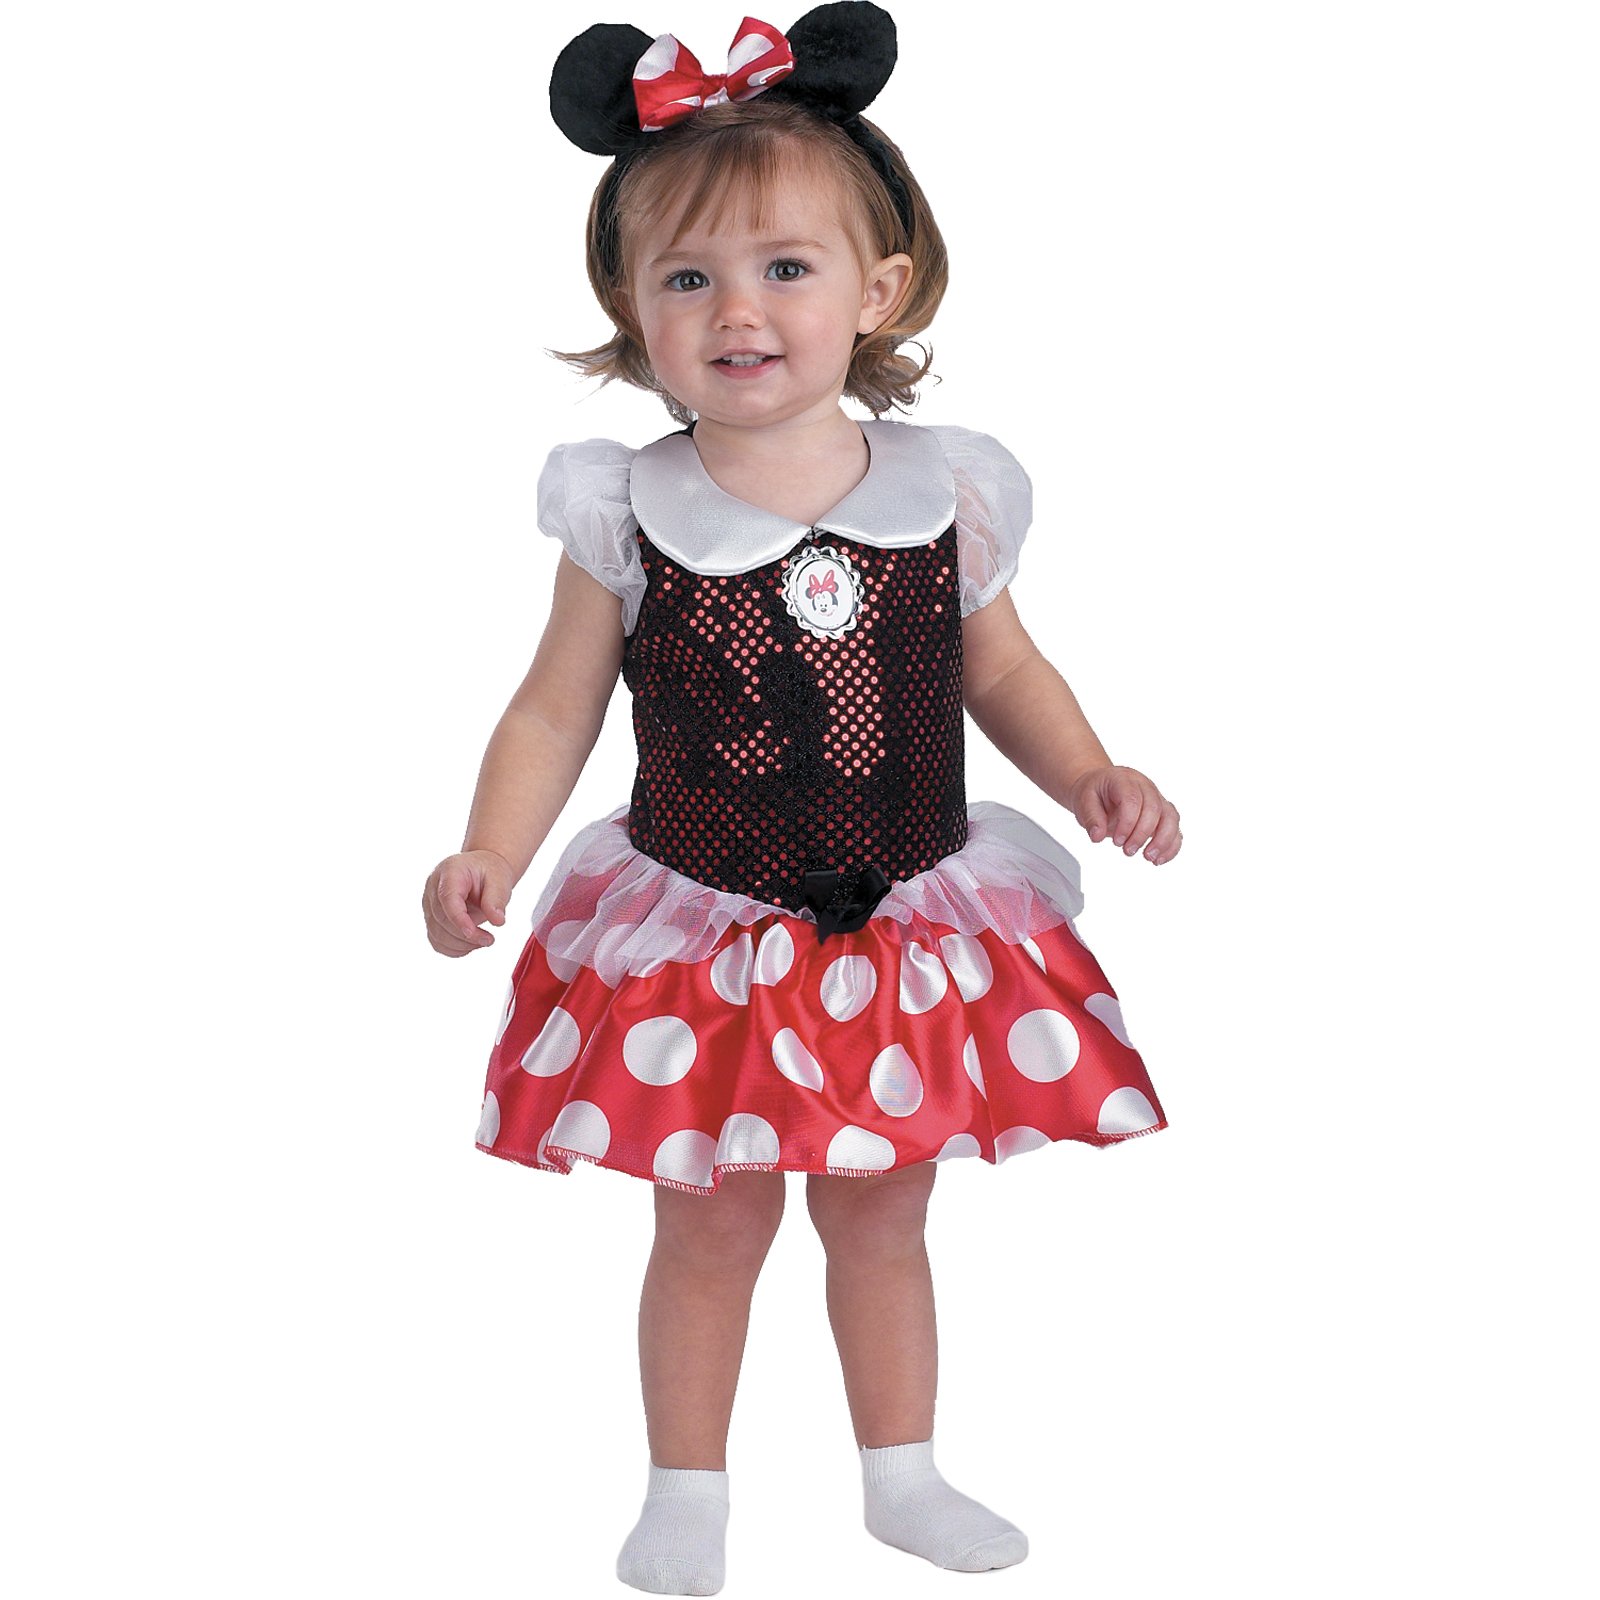 Baby Minnie Infant/Toddler Costume - Click Image to Close